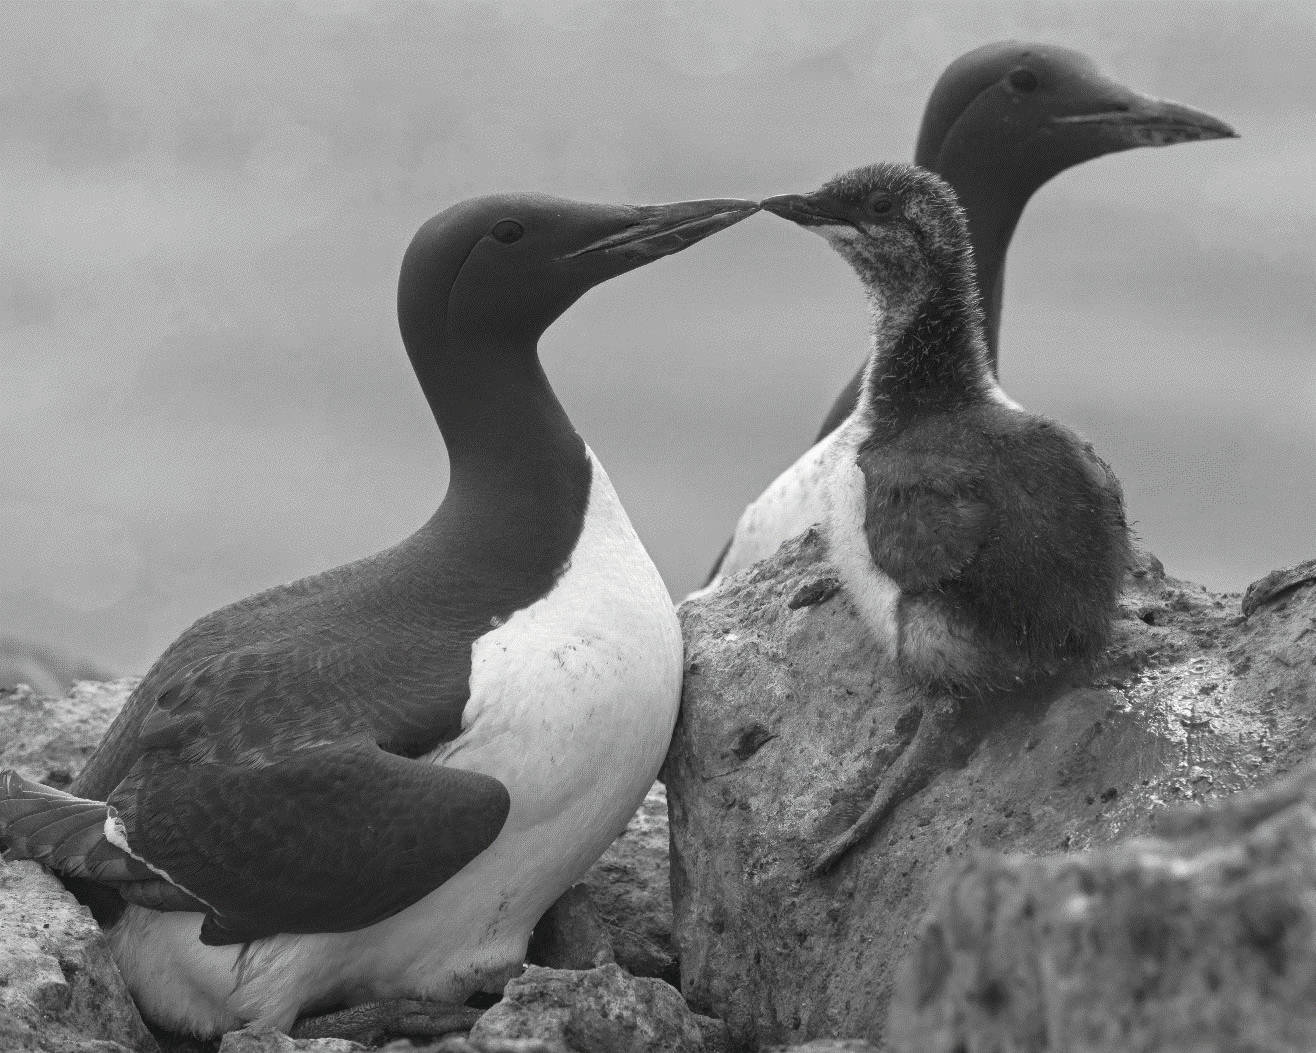 The murre die-off from 2014 to 2016 was related to the intense marine heatwave. Seabirds starved to death due to changes throughout the food web created by the warming ocean. (Photo courtesy of Sarah Schoen, US Geological Survey)